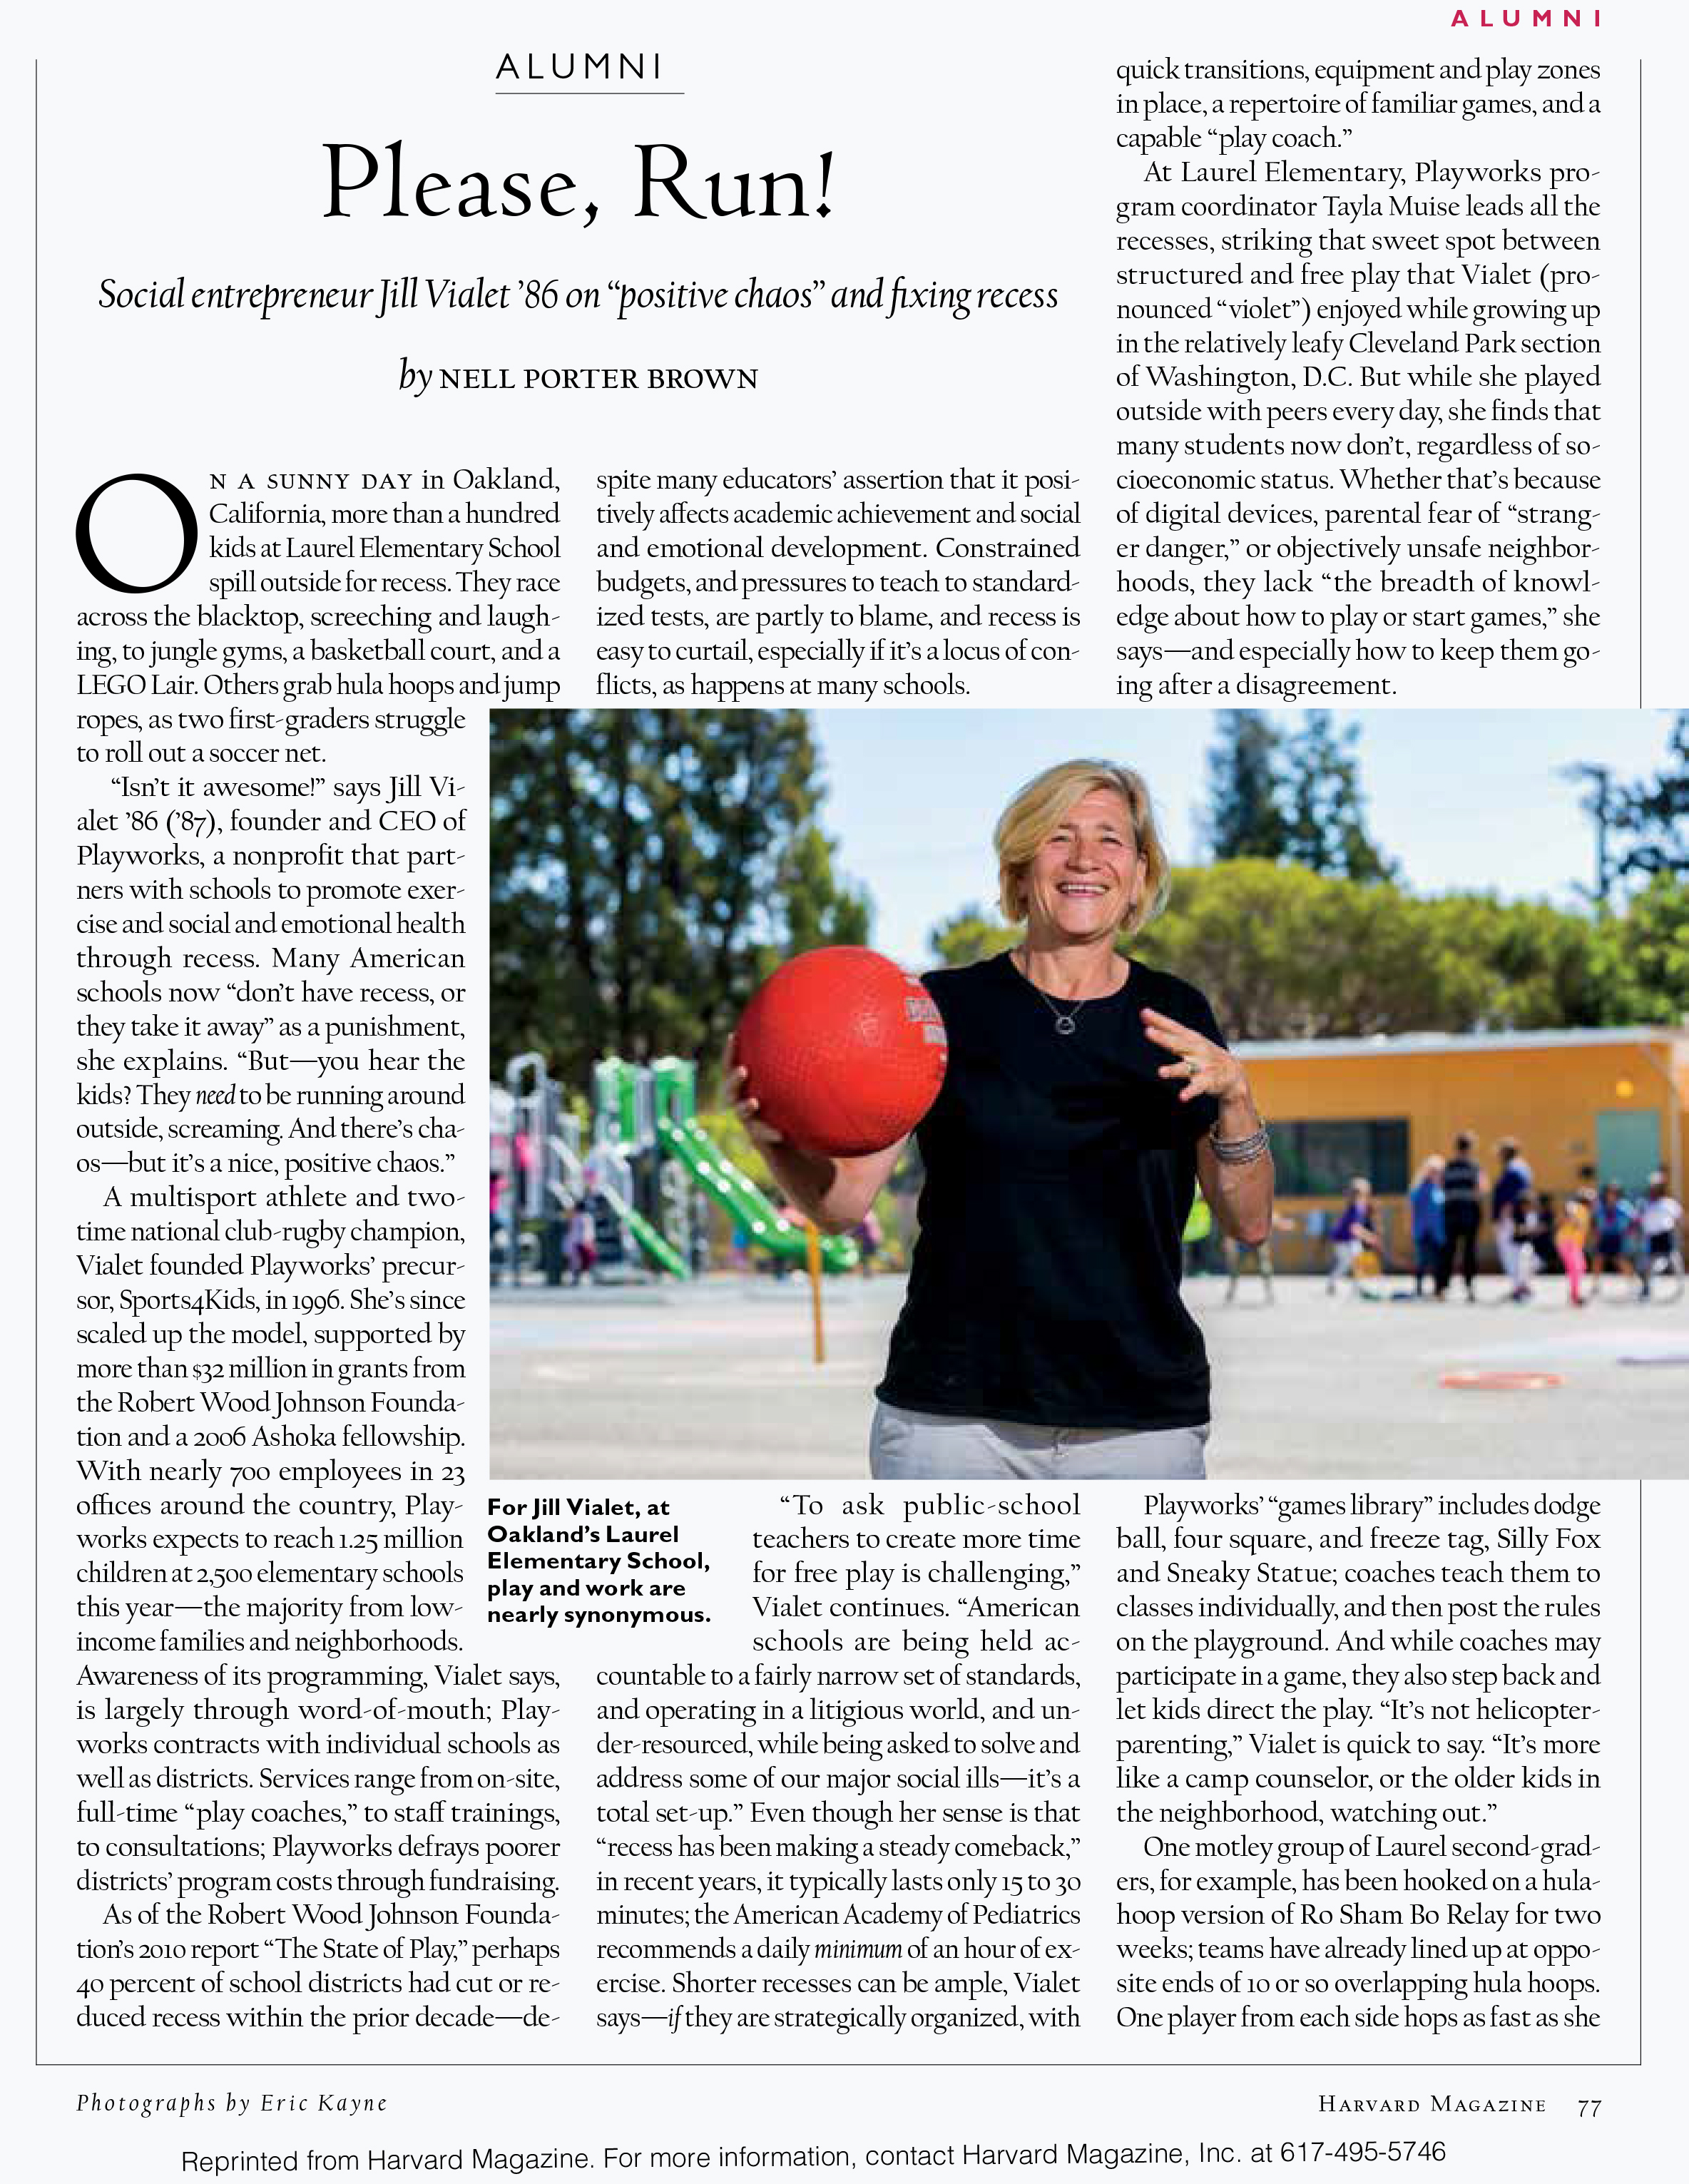  Jill Vialet, founder and CEO of  Playworks,  a nonprofit that partners with schools to promote exercise and social and emotional health through recess. 